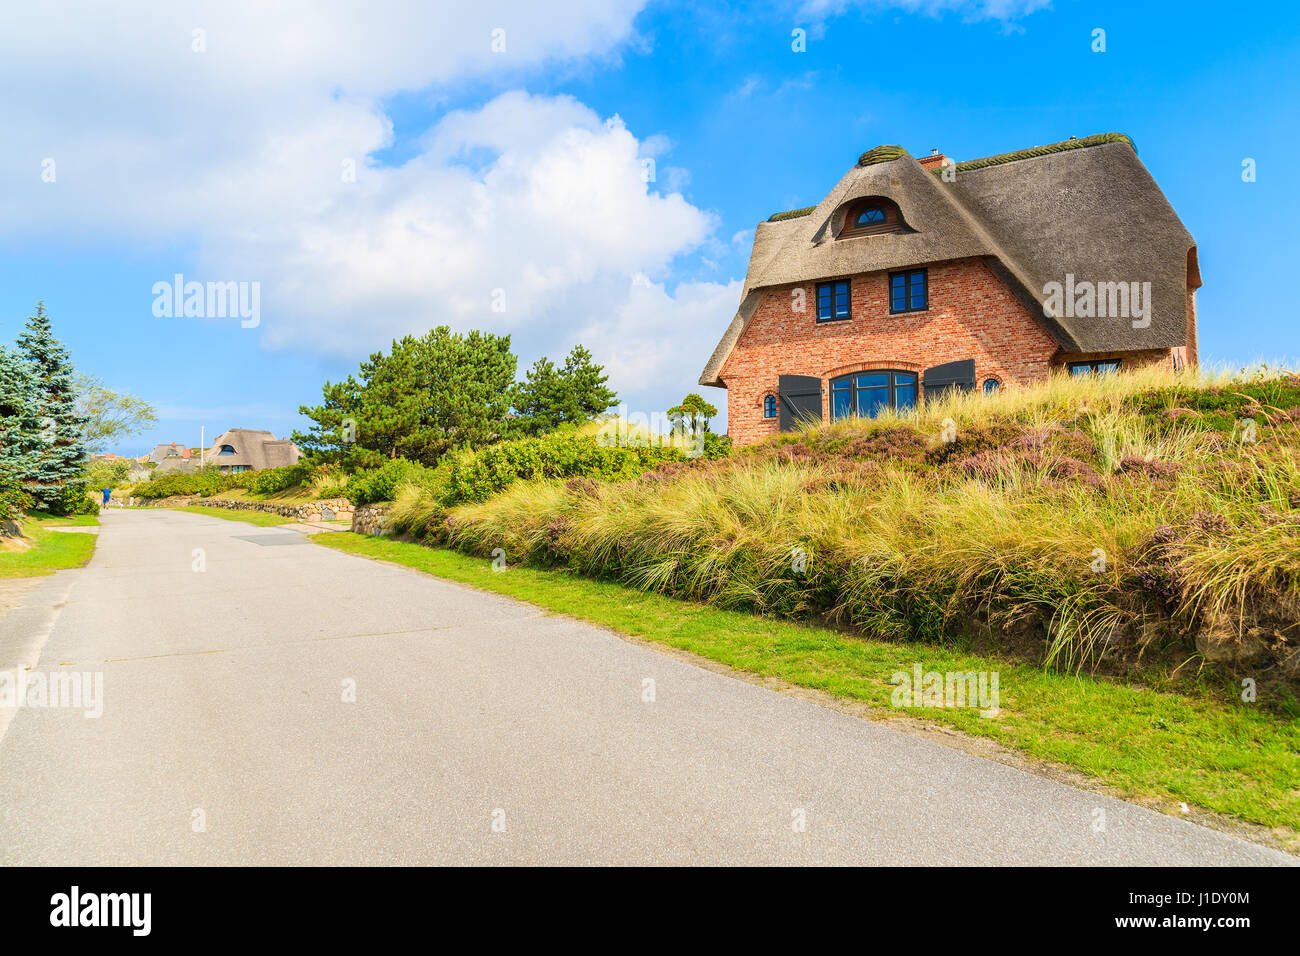 Road in Westerheide village with typical house on side, Sylt island, Germany Stock Photo